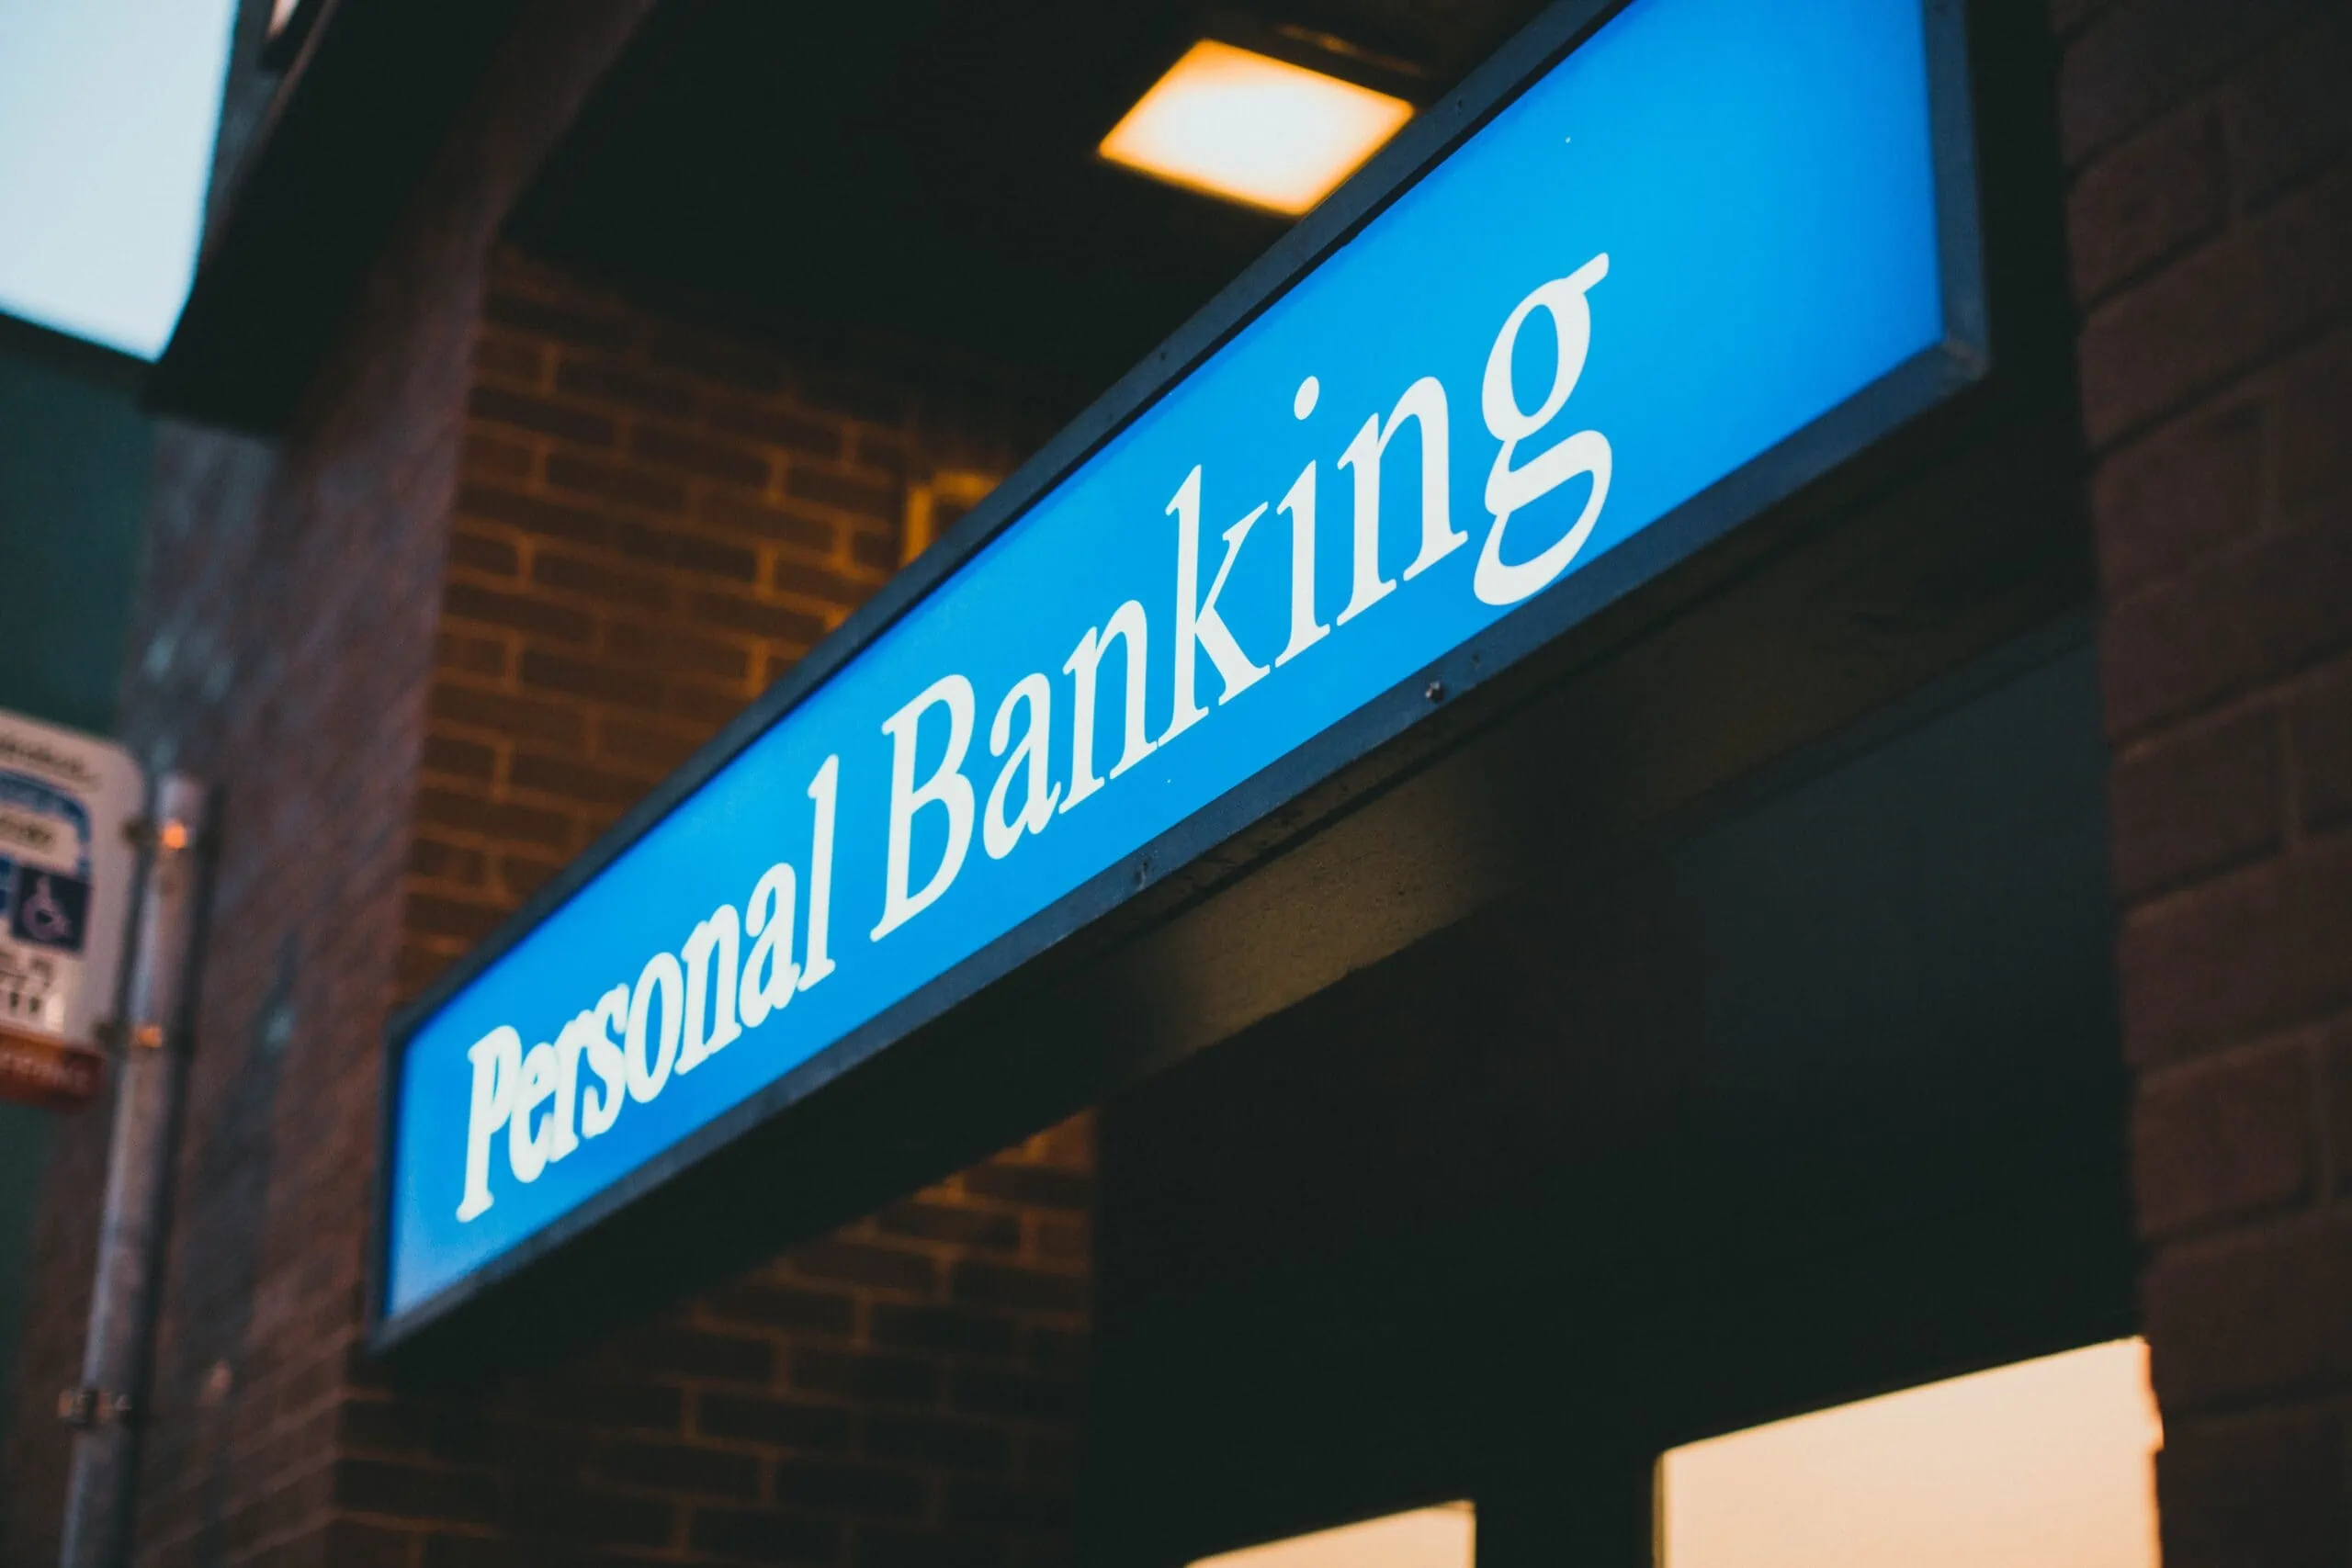 Sign that reads “personal banking” outside of a bank equipped with security cameras